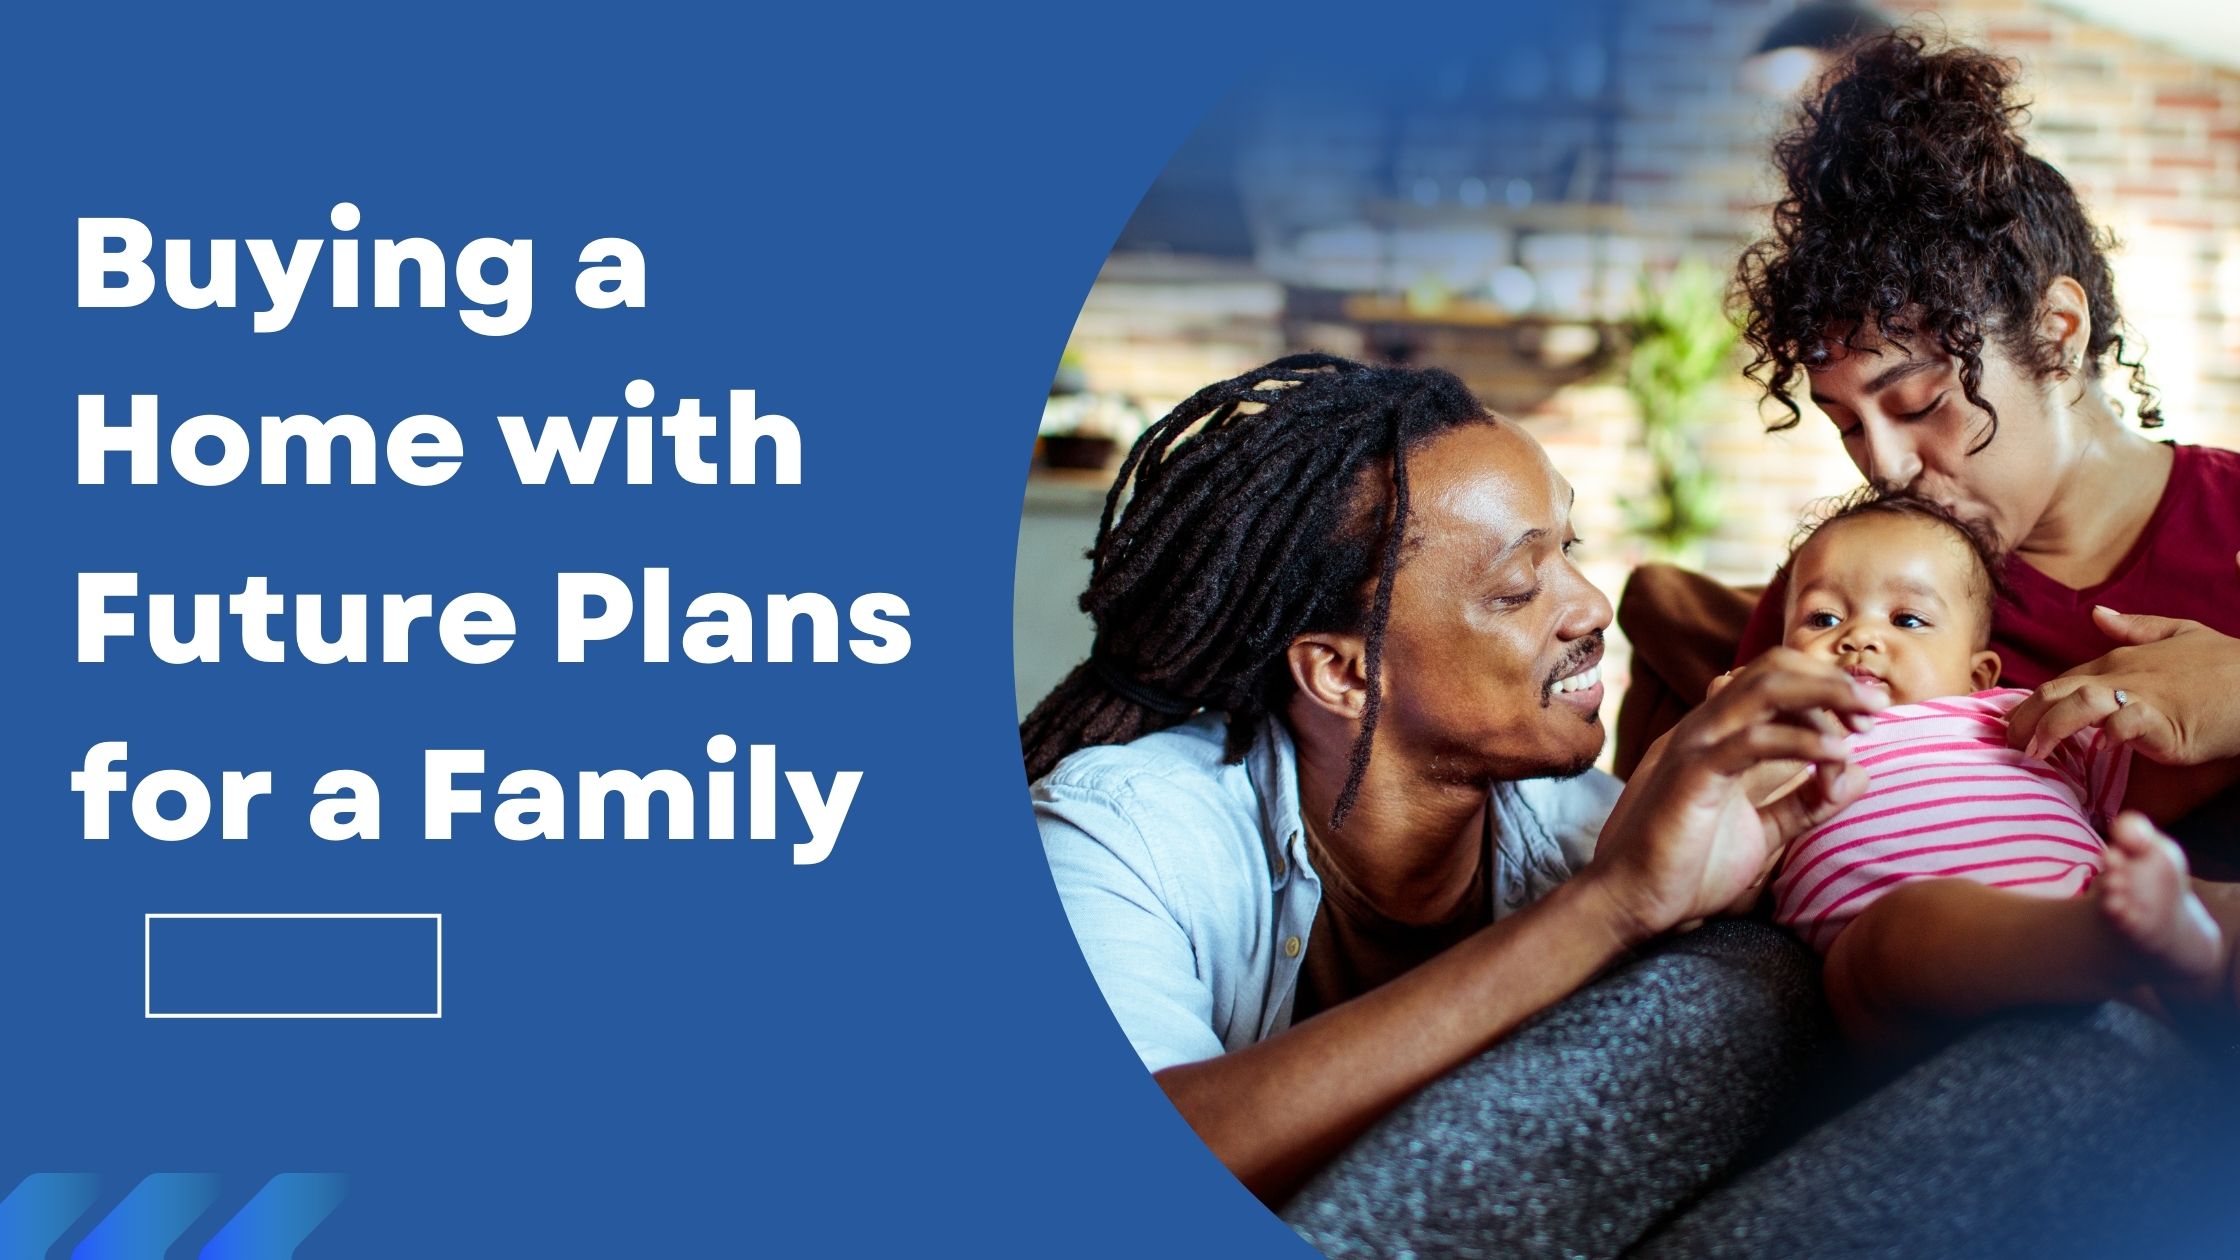 Buying a Home with Future Plans for a Family